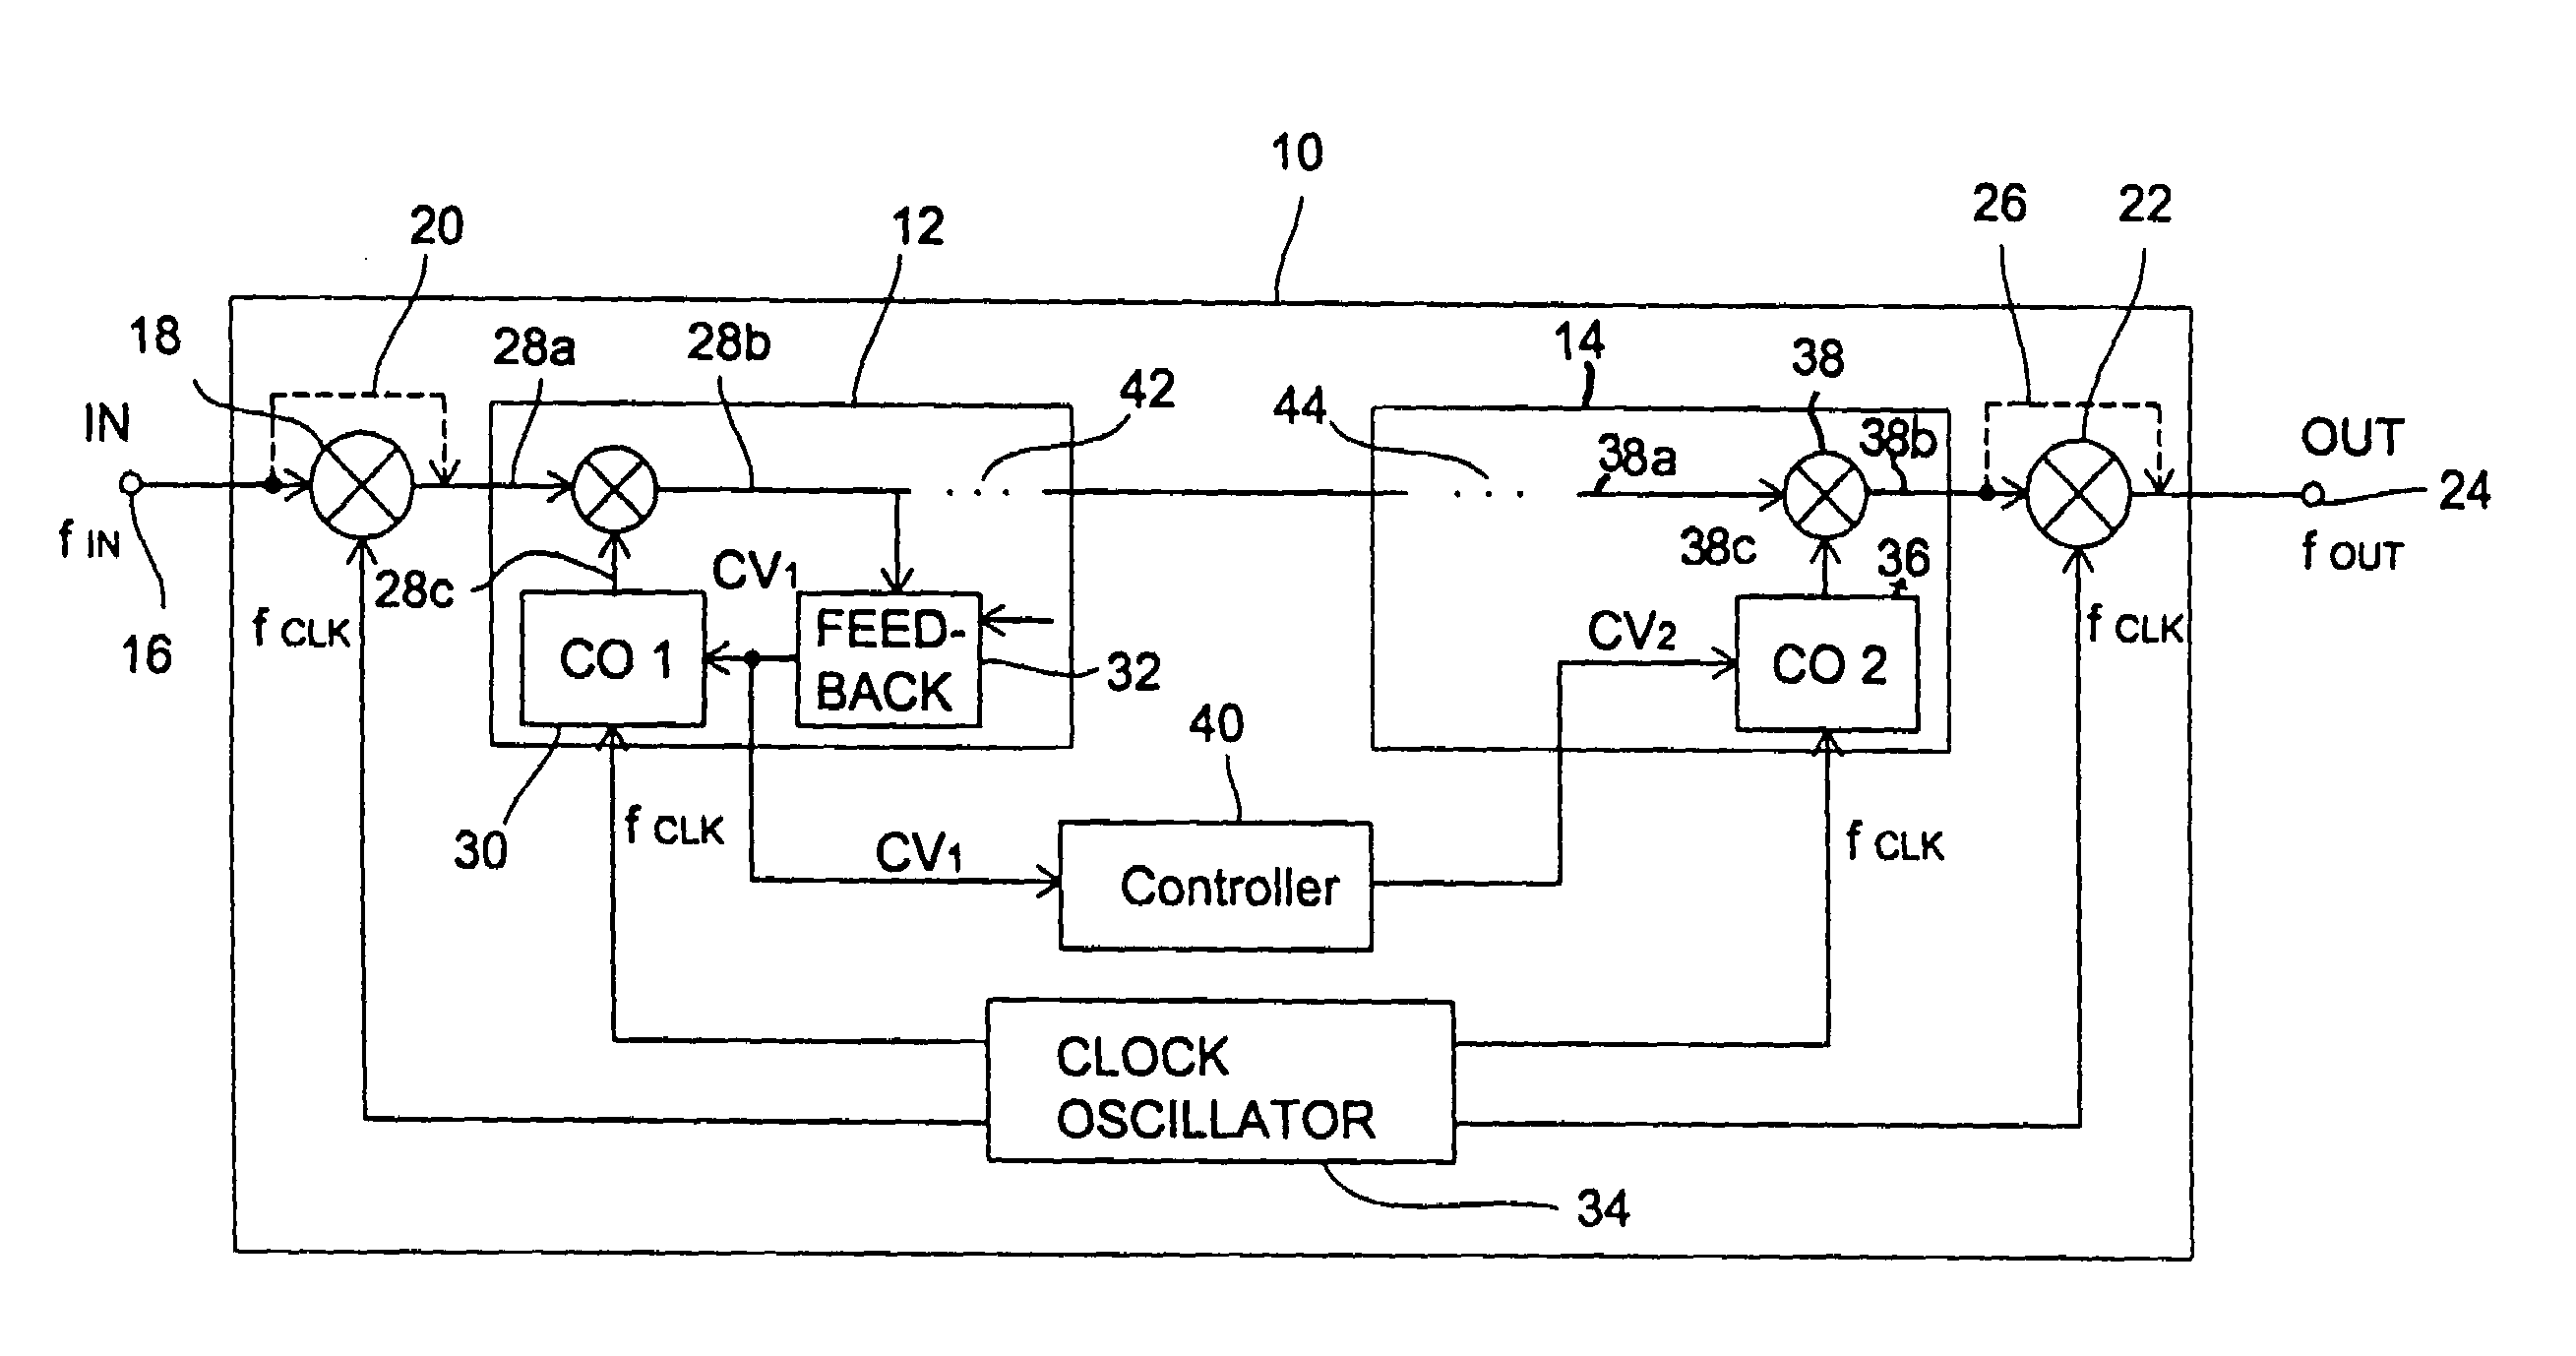 Repeater system and method of receiving a modulated input signal and transmitting a modulated output signal